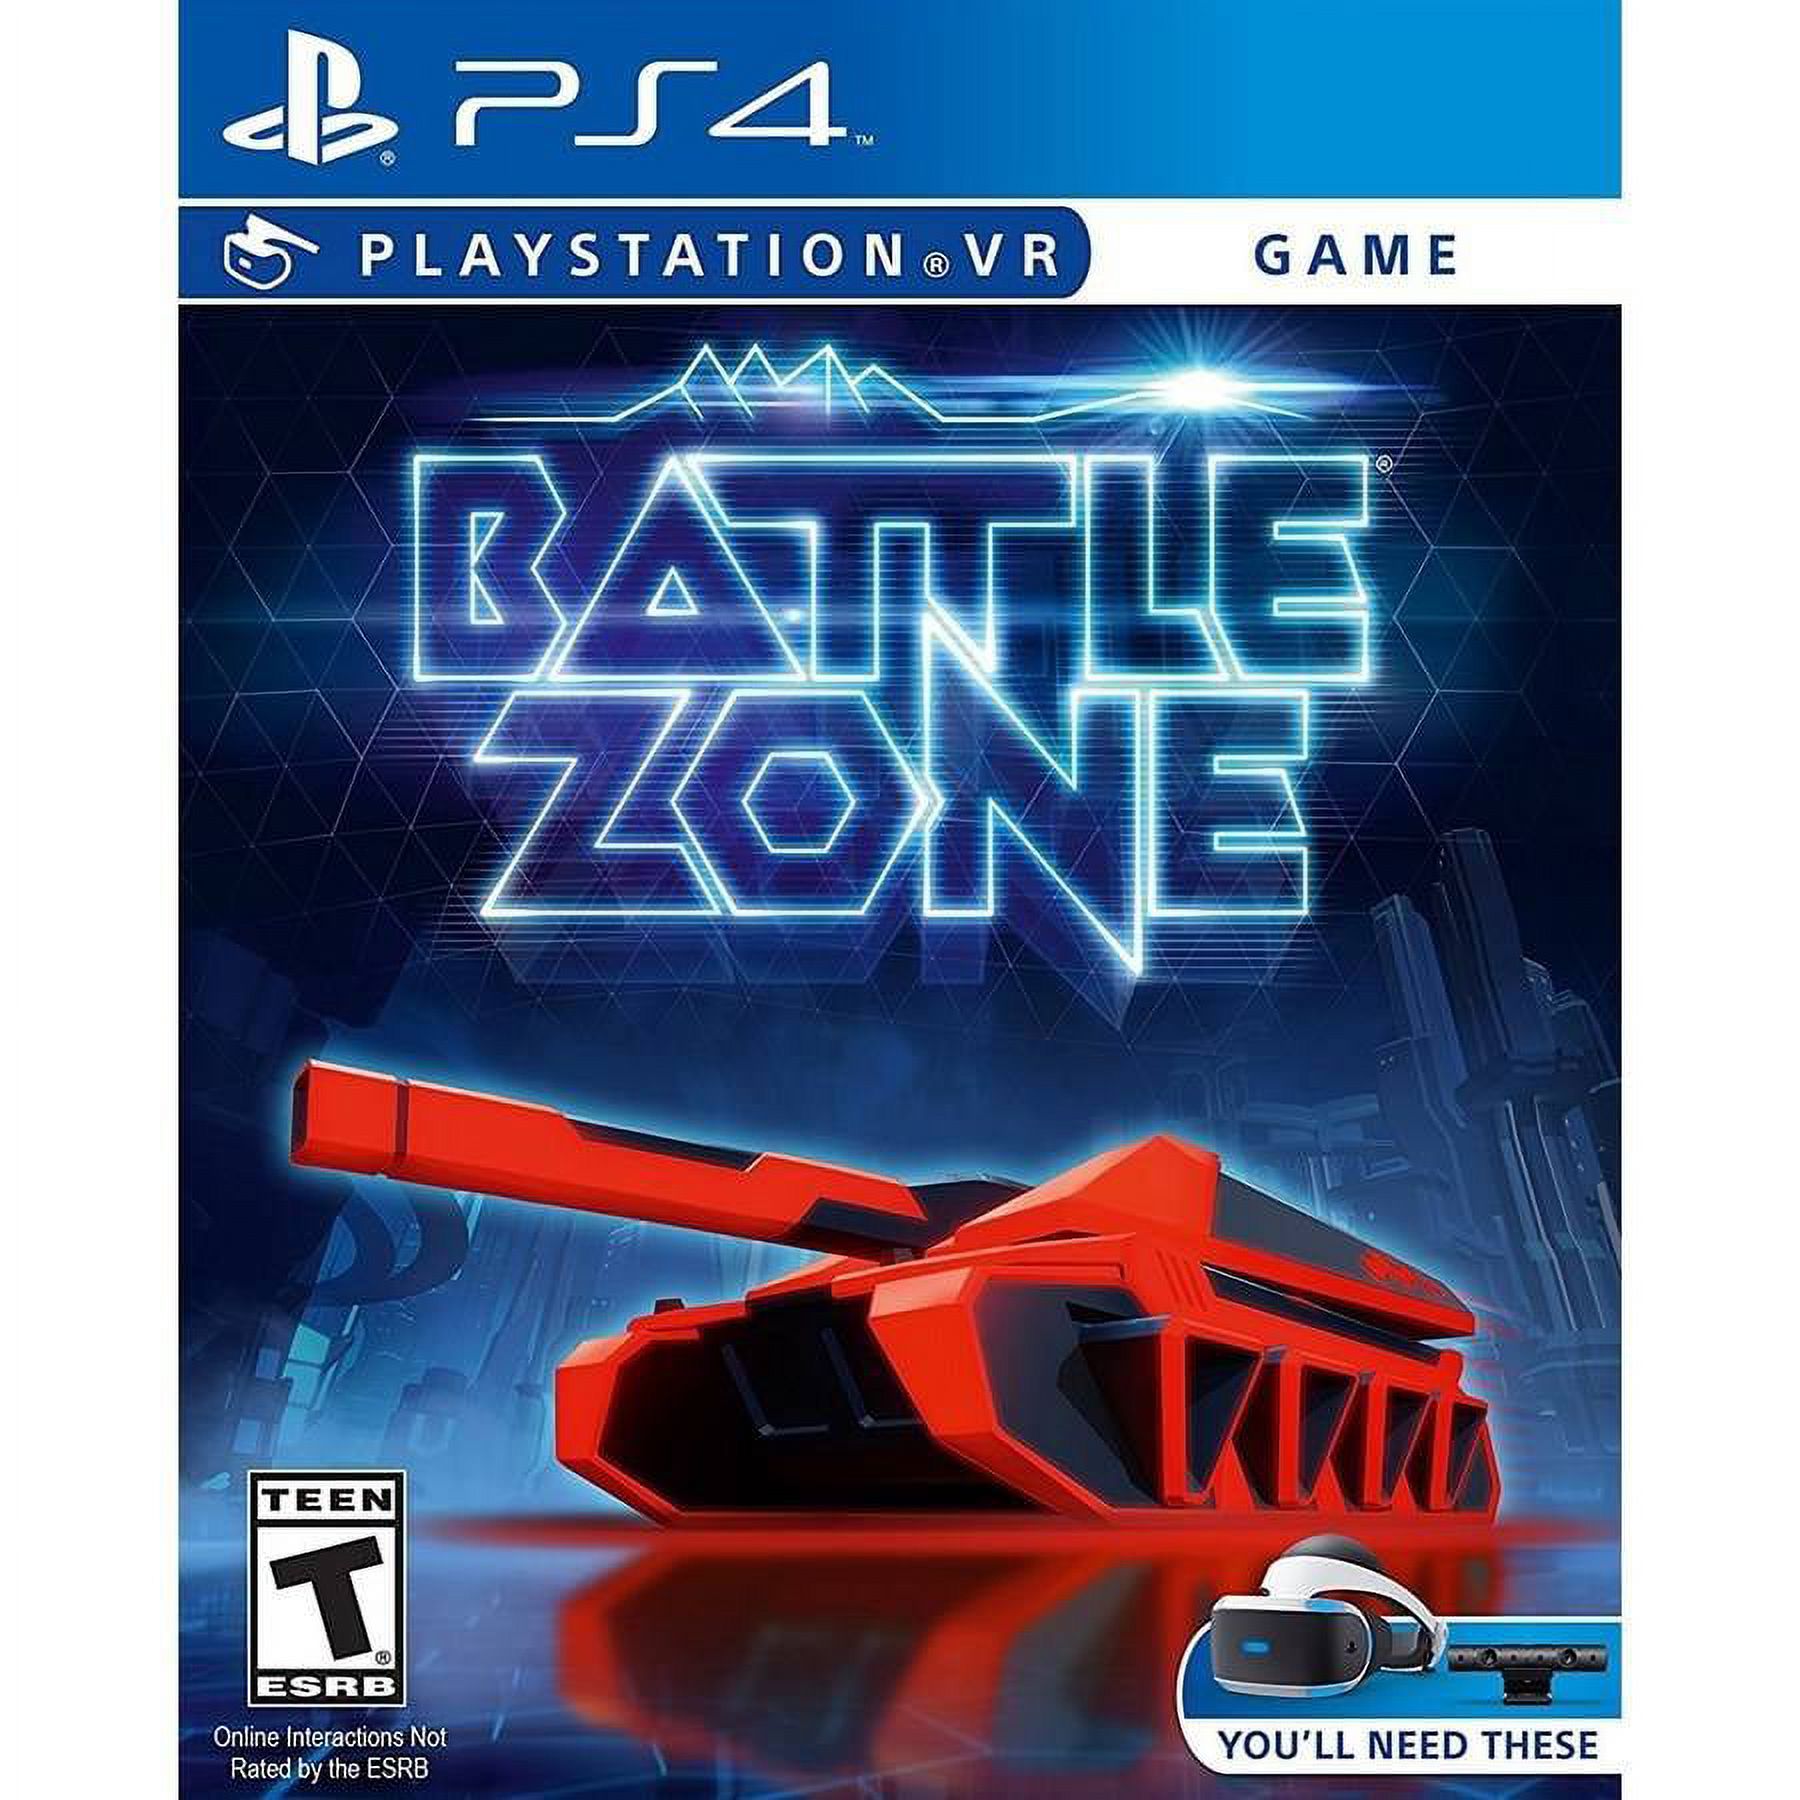 Battlezone VR - Pre-Owned (PS4) - image 1 of 8